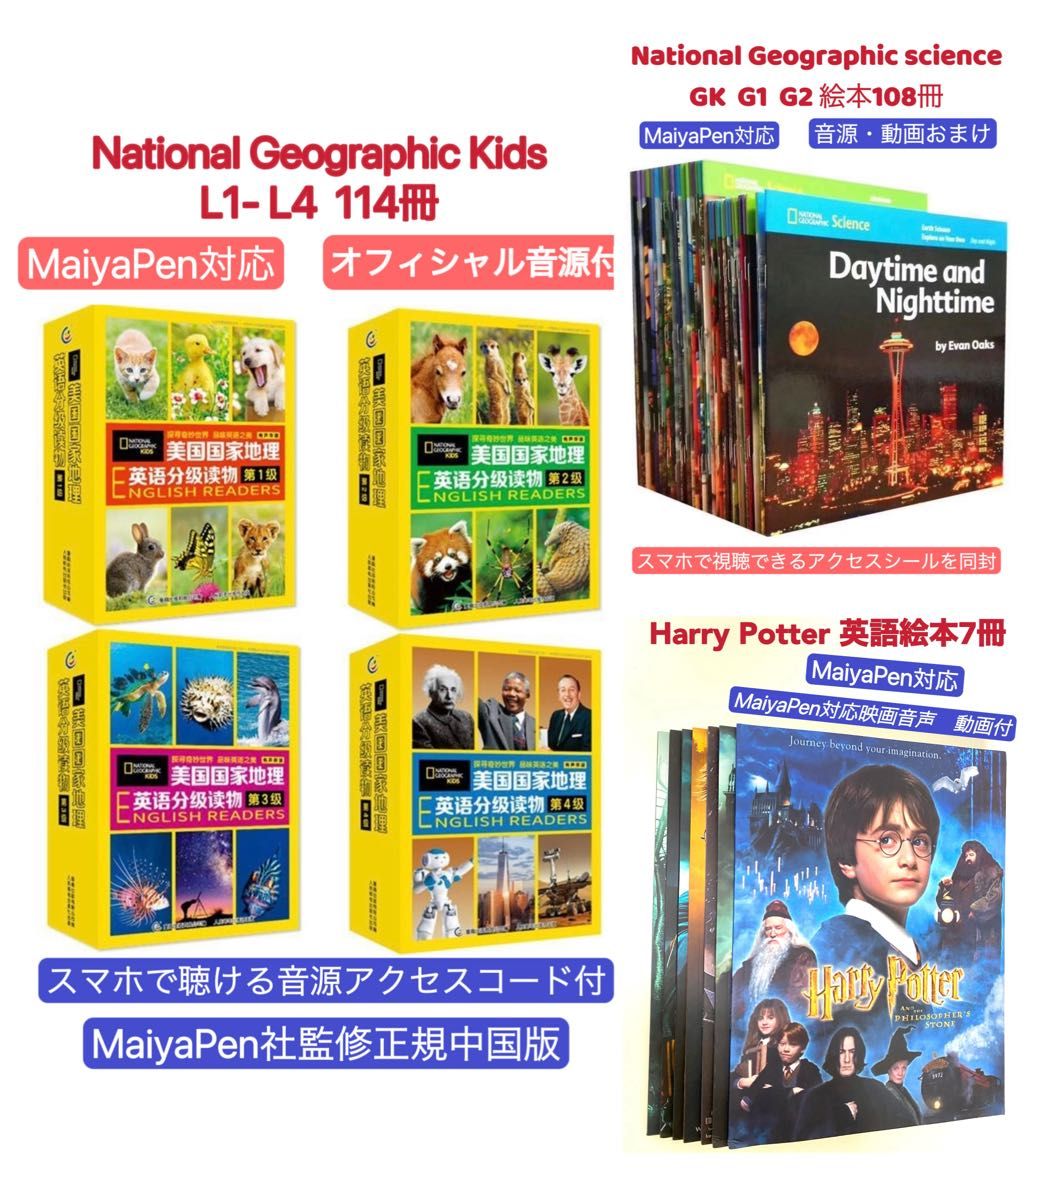 National Geographic Science マイヤペン対応 National Geographic